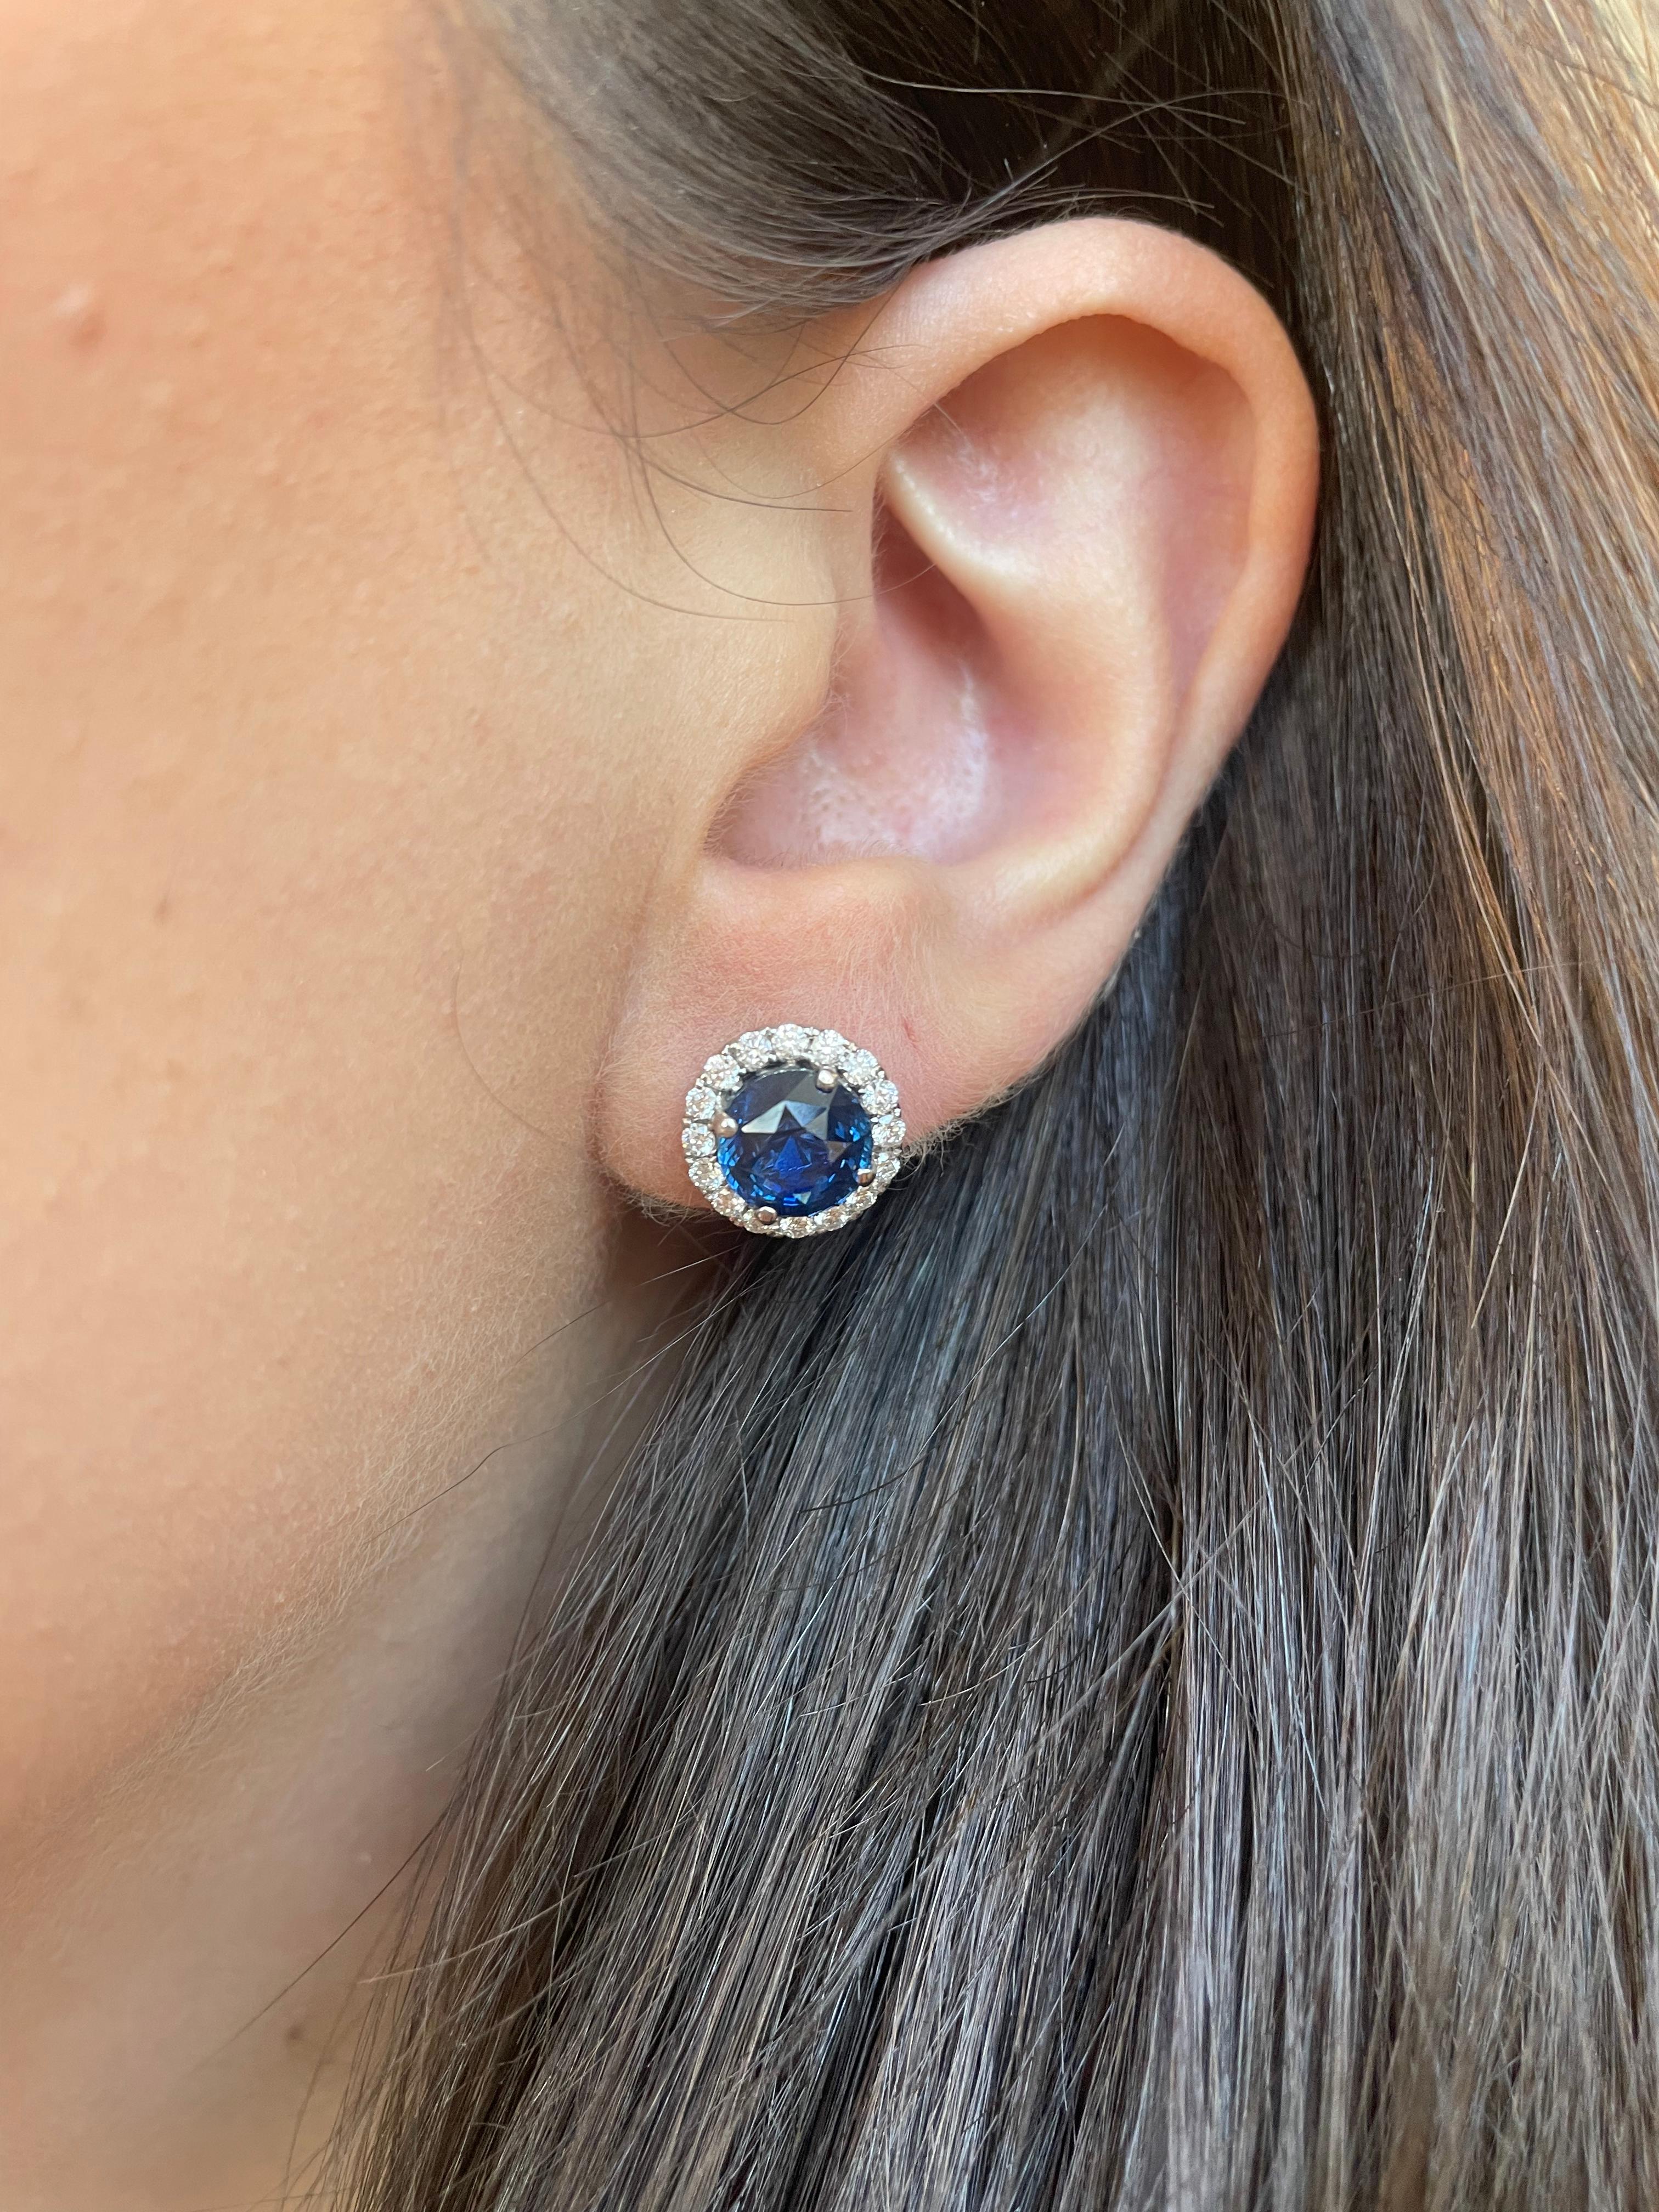 Sensational sapphire and diamond stud earrings.
2 round sapphire,  4.46 carats total. Complimented by 32 round brilliant diamonds, 0.60 carats. Approximately G/H color and SI clarity. 18k white gold, 3.92 grams. 
5.06ct total gemstone weight.